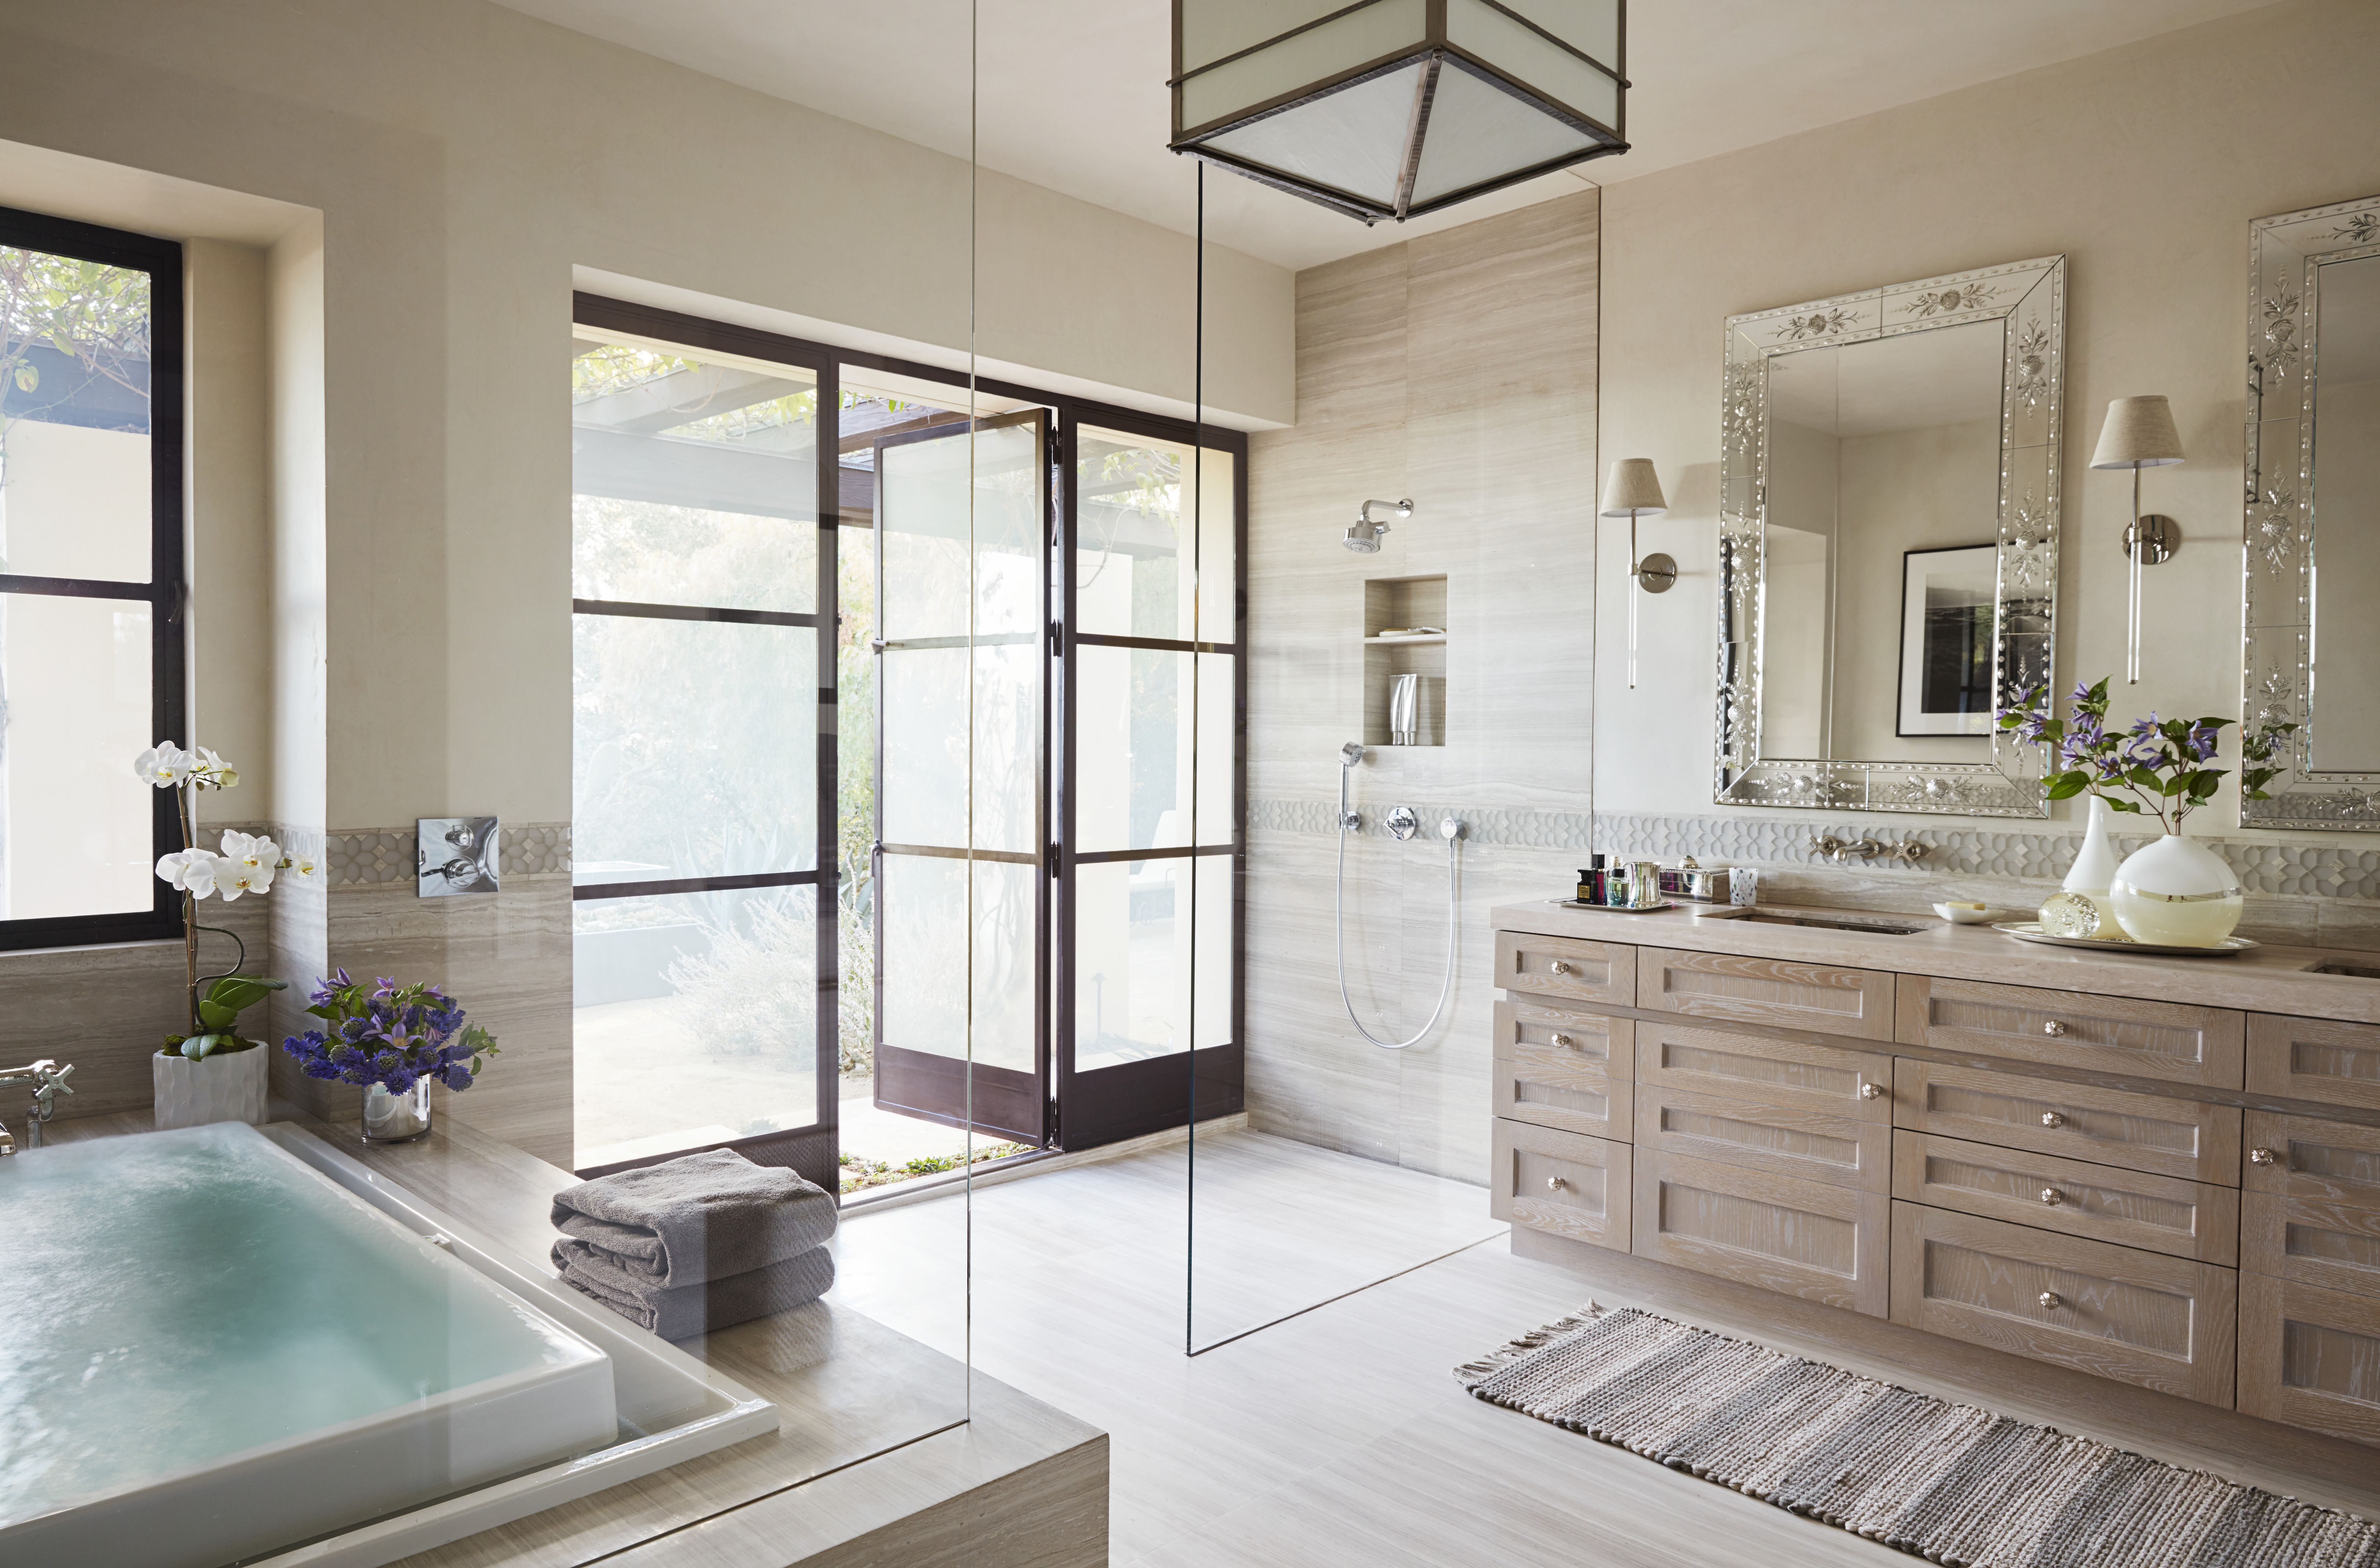 The biggest bathroom trends 2023: 21 key designs and colors